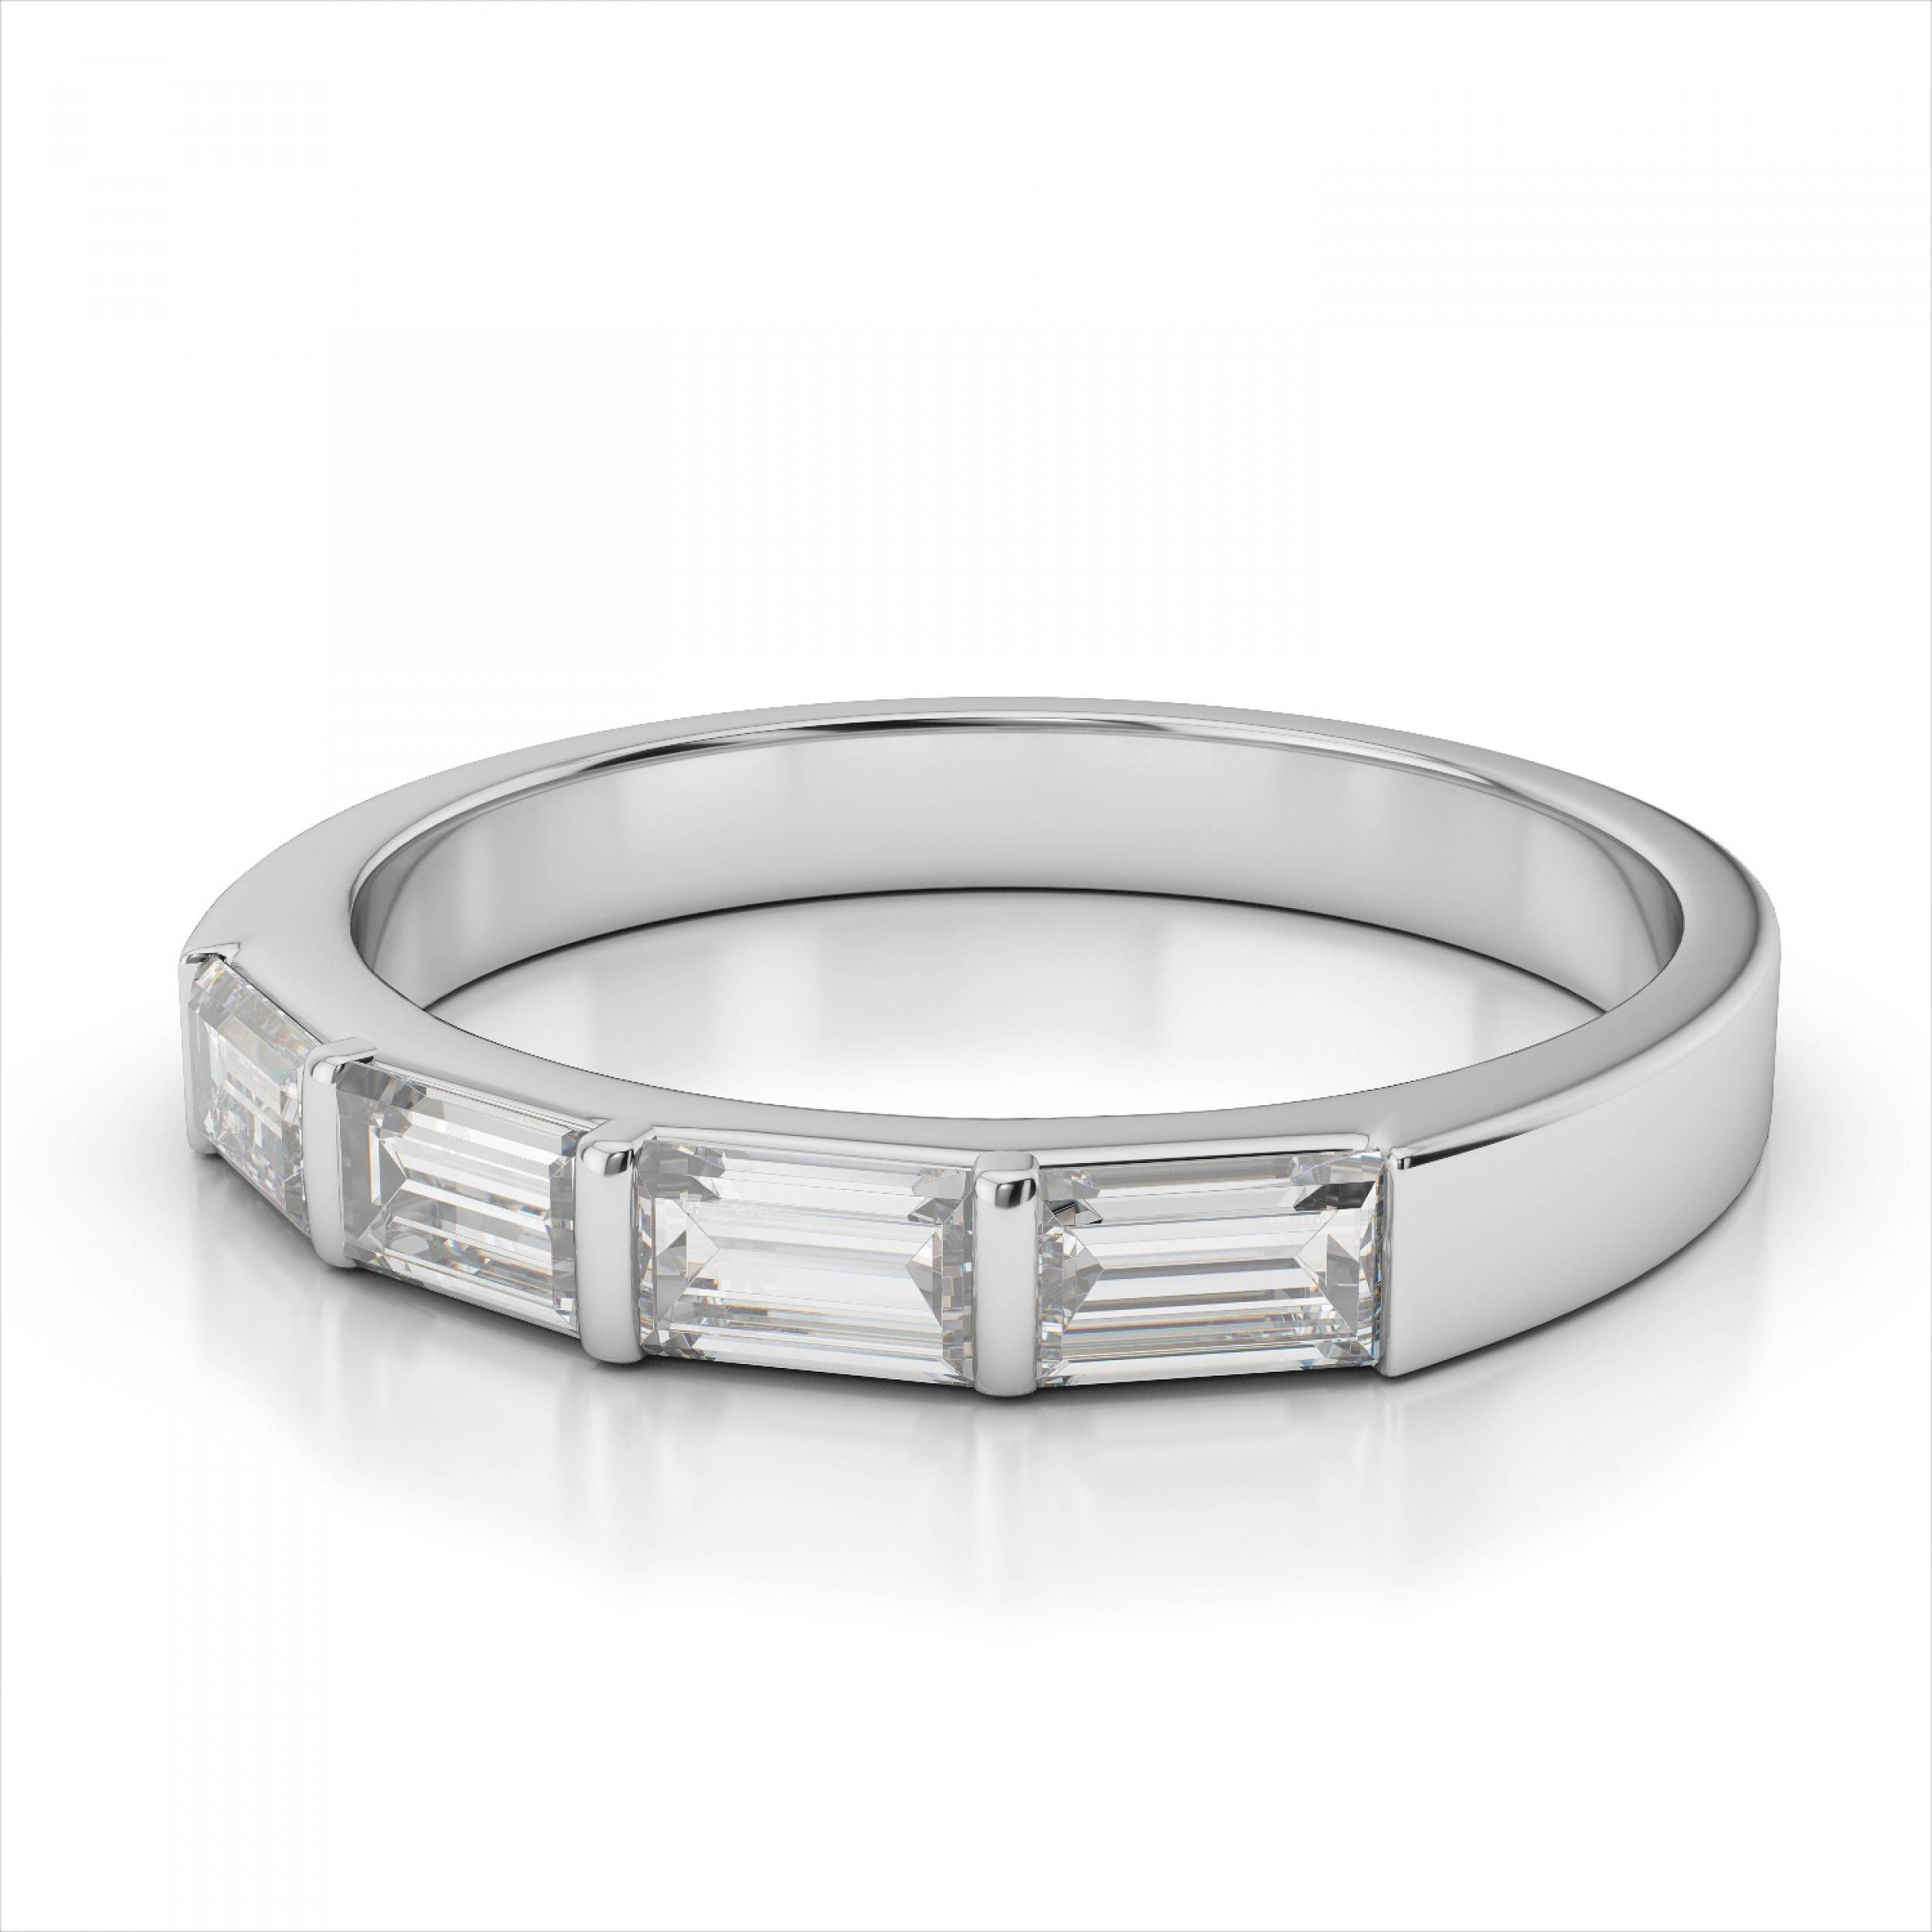 Four Stone Diamond Wedding Bands And Rings With Regard To Wedding Bands With Baguettes (View 9 of 15)